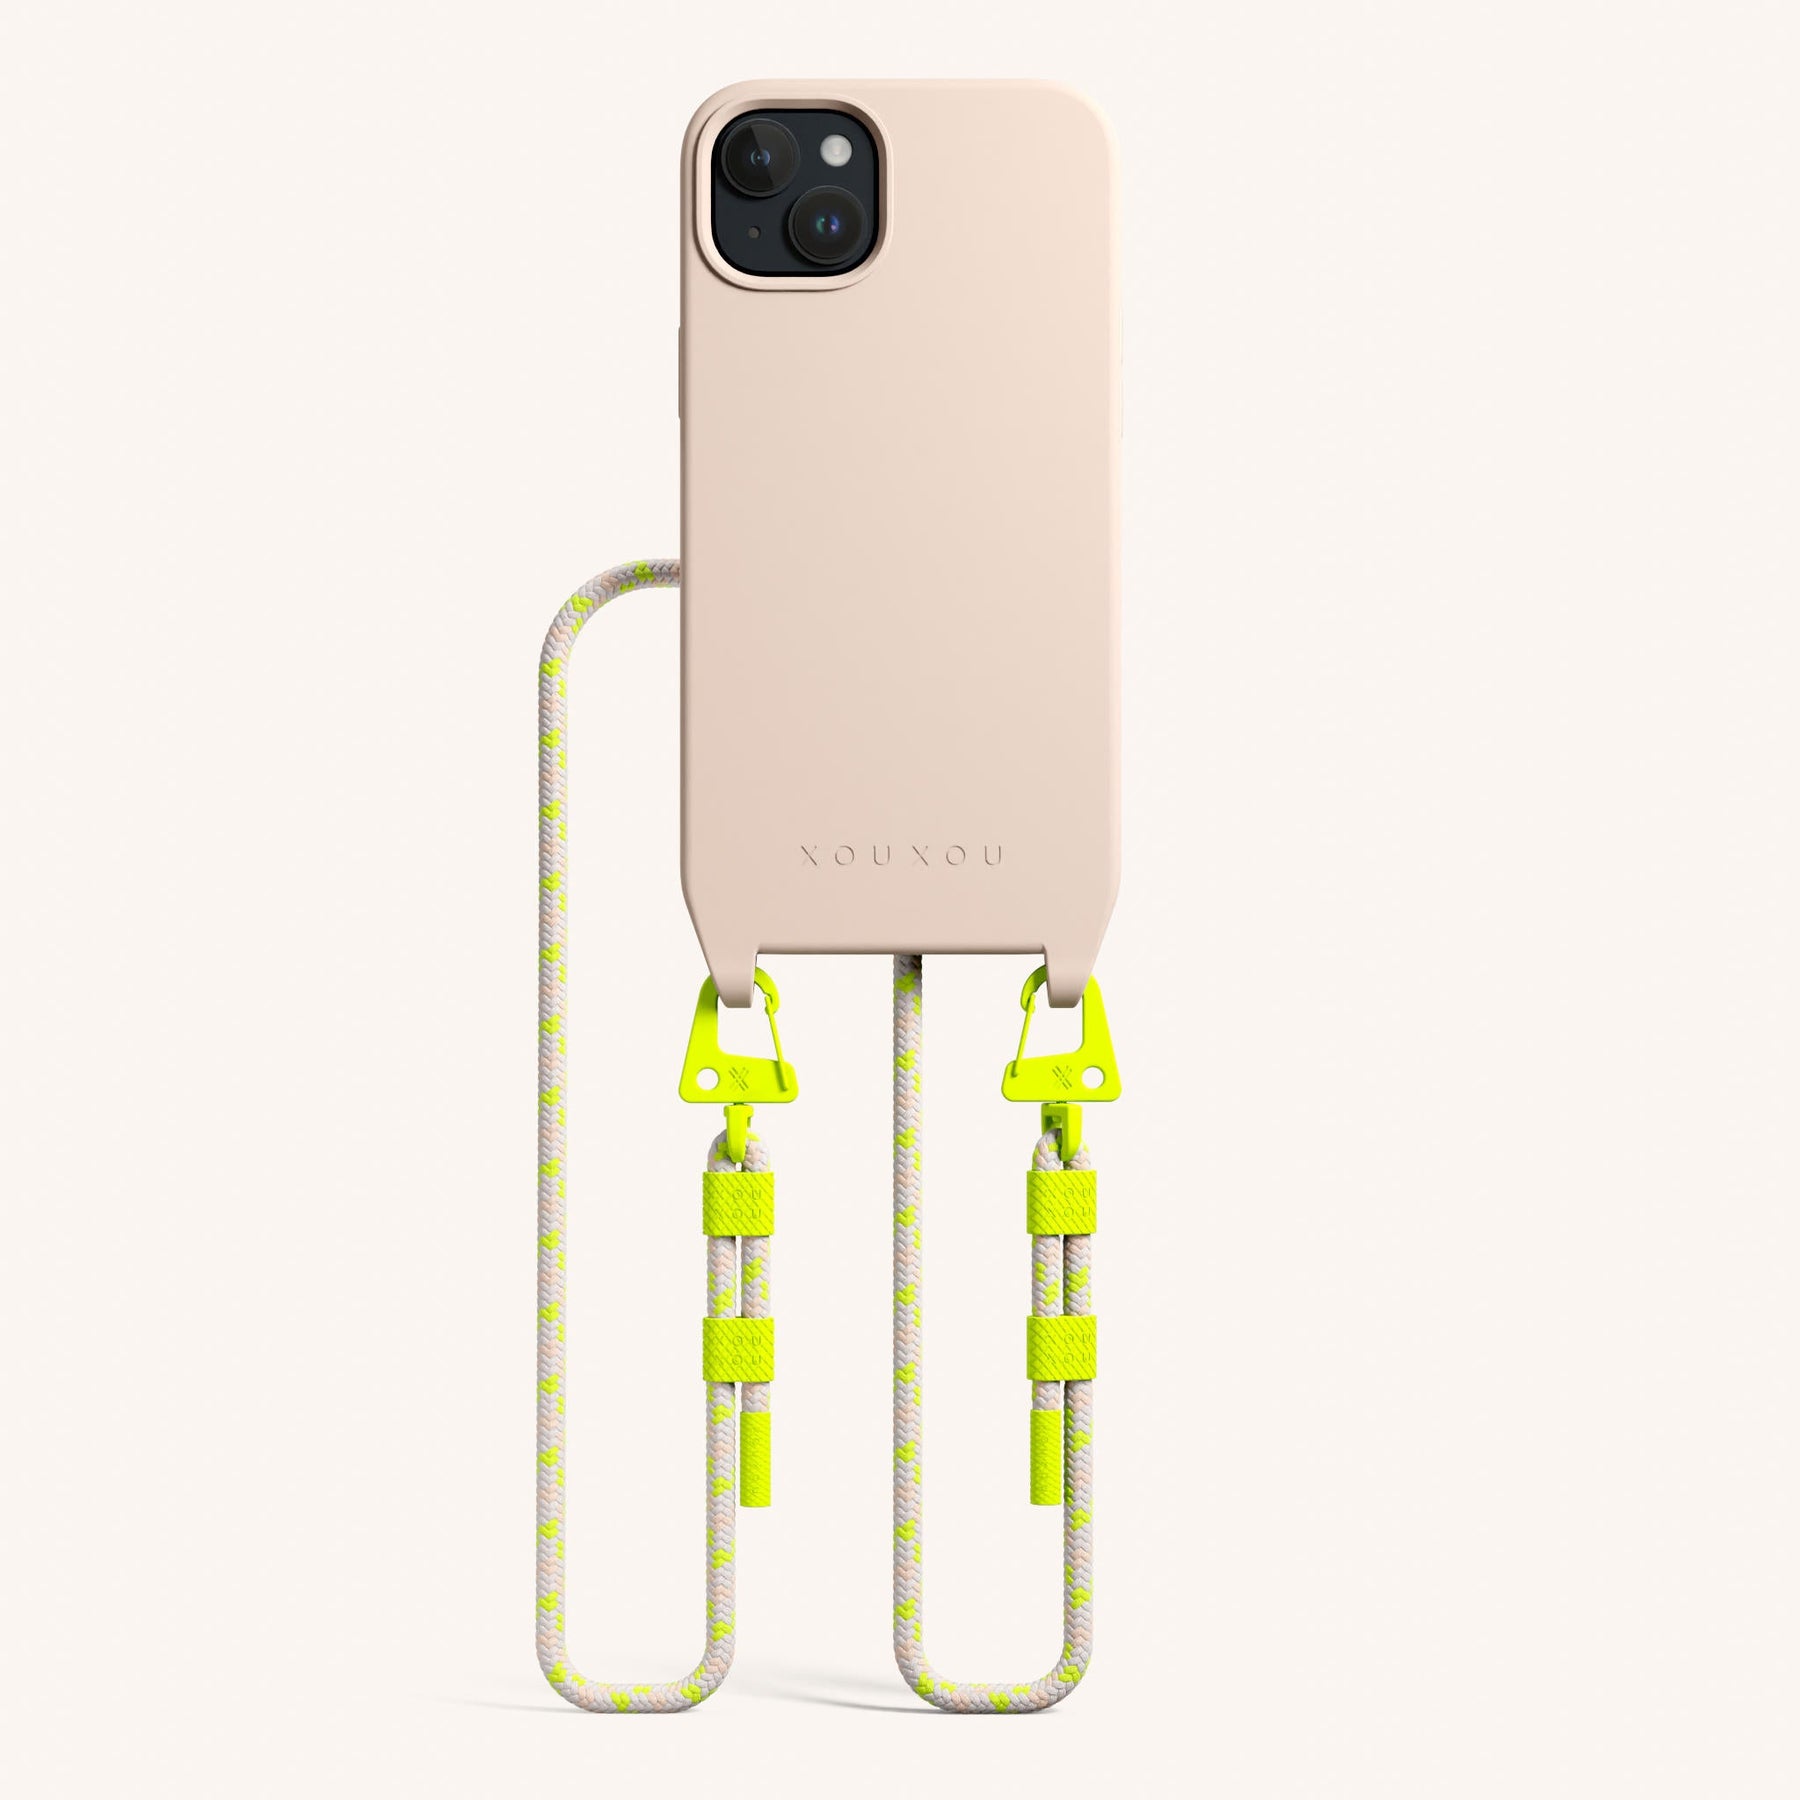 Phone Necklace with Carabiner Rope in Powder Pink + Neon Camouflage